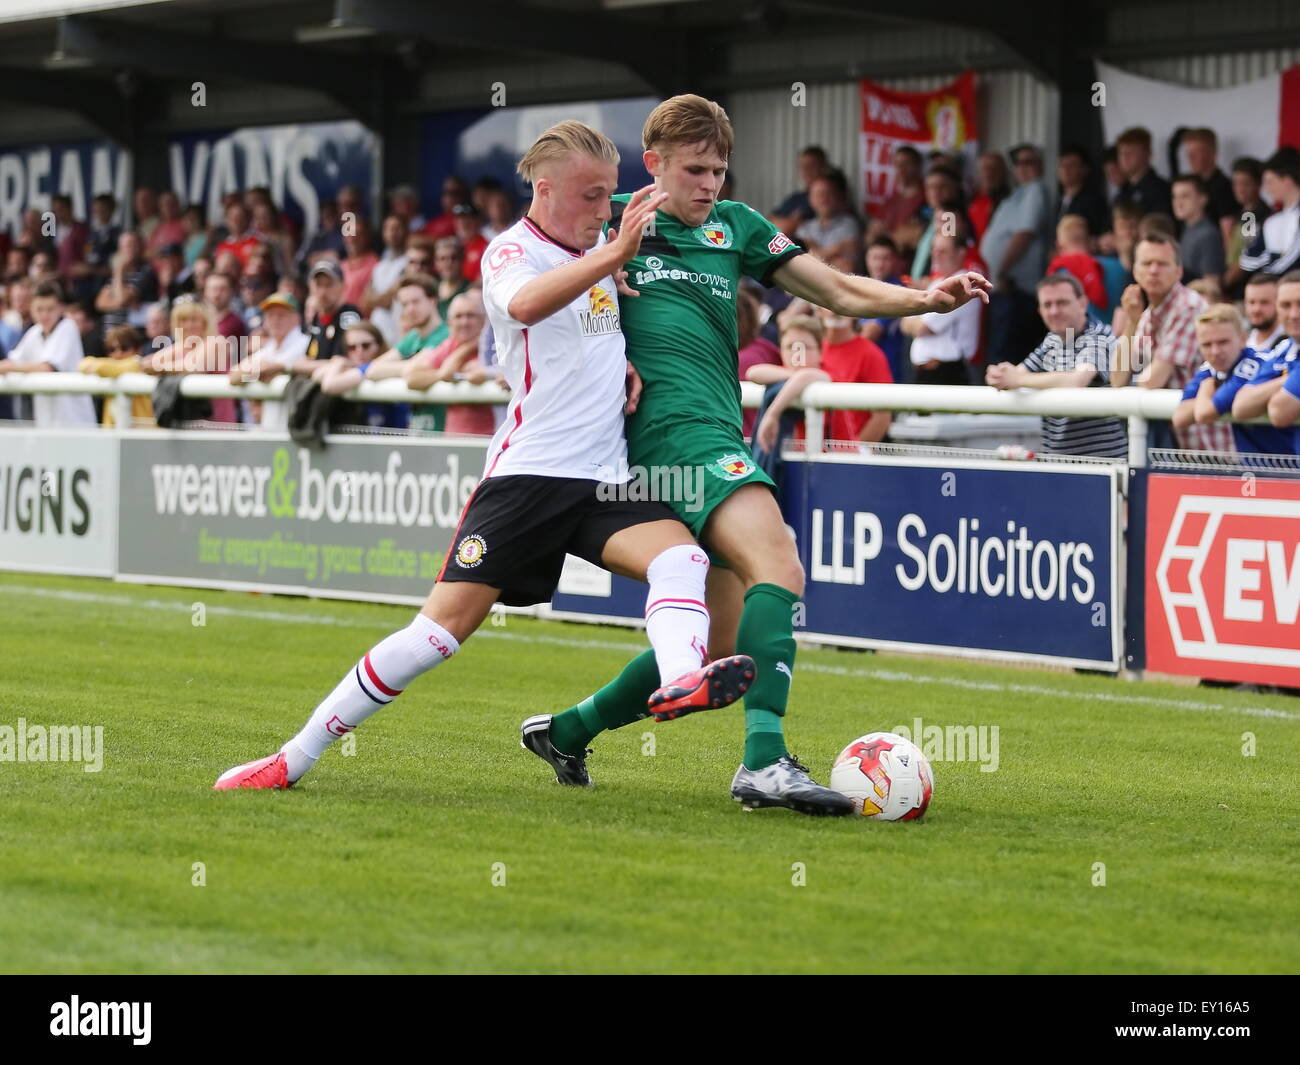 Nantwich, UK. 19th July, 2015. Crewe Alexandra's George Cooper battles for the ball with Nantwich Town's Andy White during the pre-season friendly match at The Weaver Stadium, Nantwich as Nantwich Town entertained Crewe Alexandra. Credit:  SJN/Alamy Live News Stock Photo